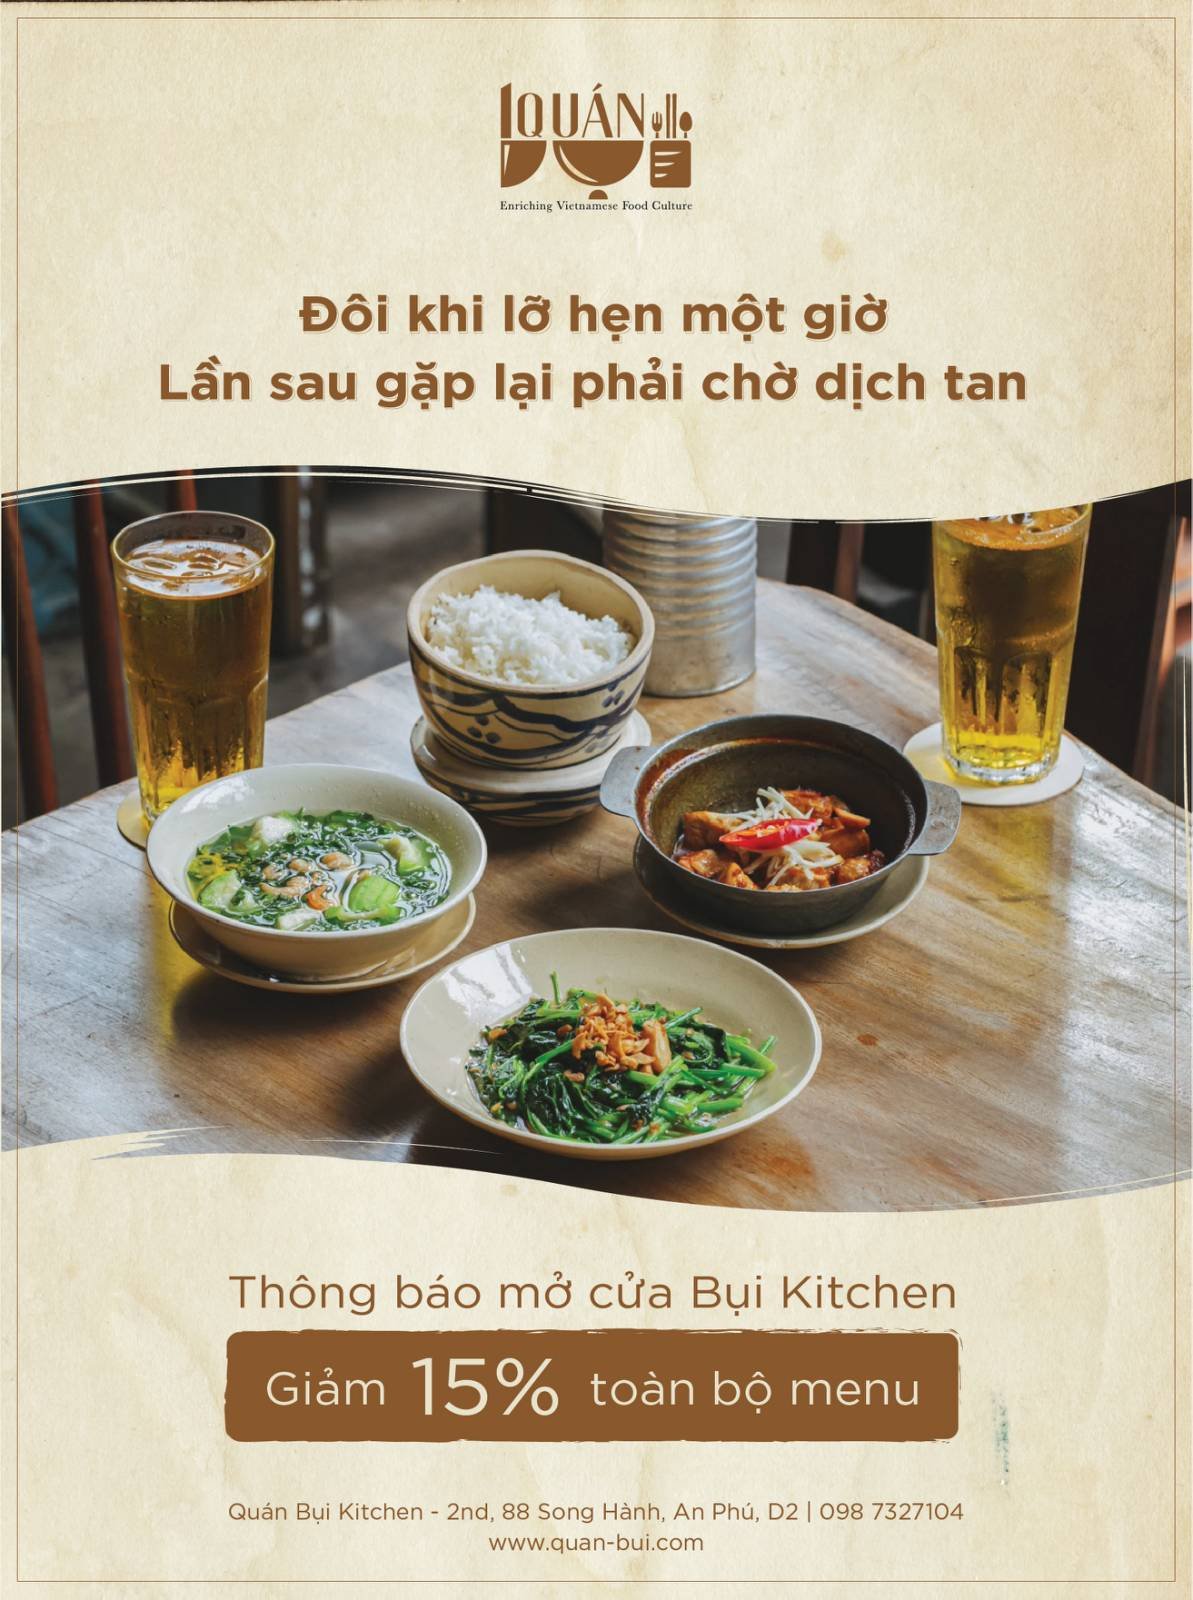 BUI KITCHEN HAS COME BACK